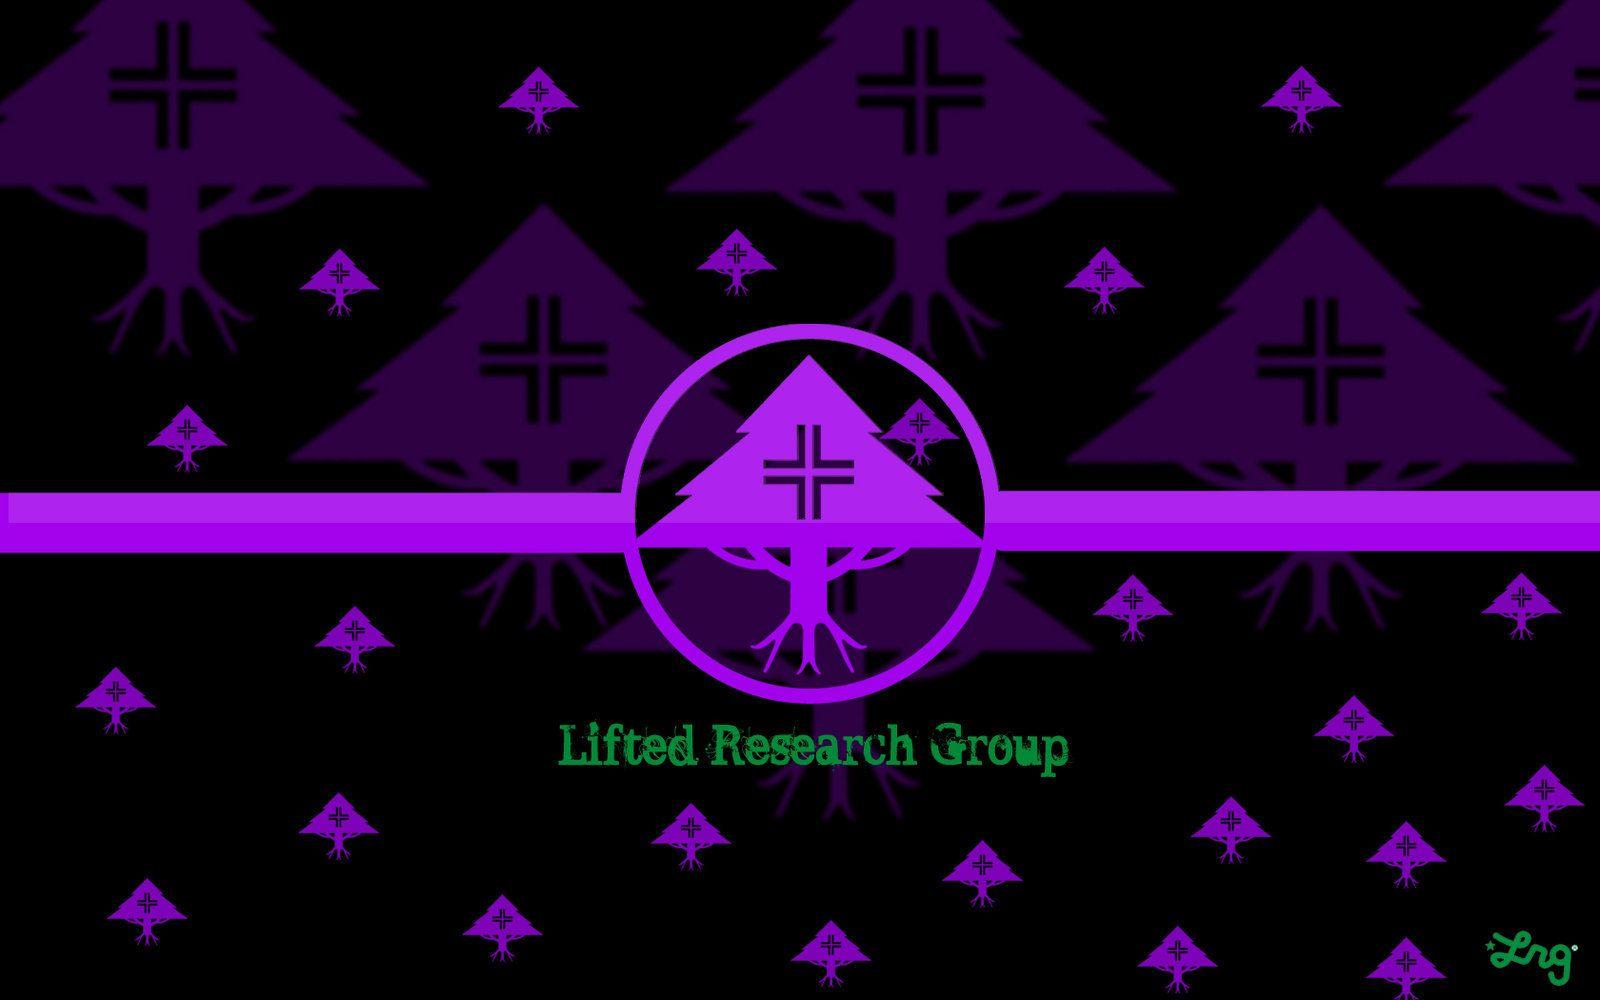 Lifted Research Group Logo - College scholarship essay writing. Professional Academic Help Online ...